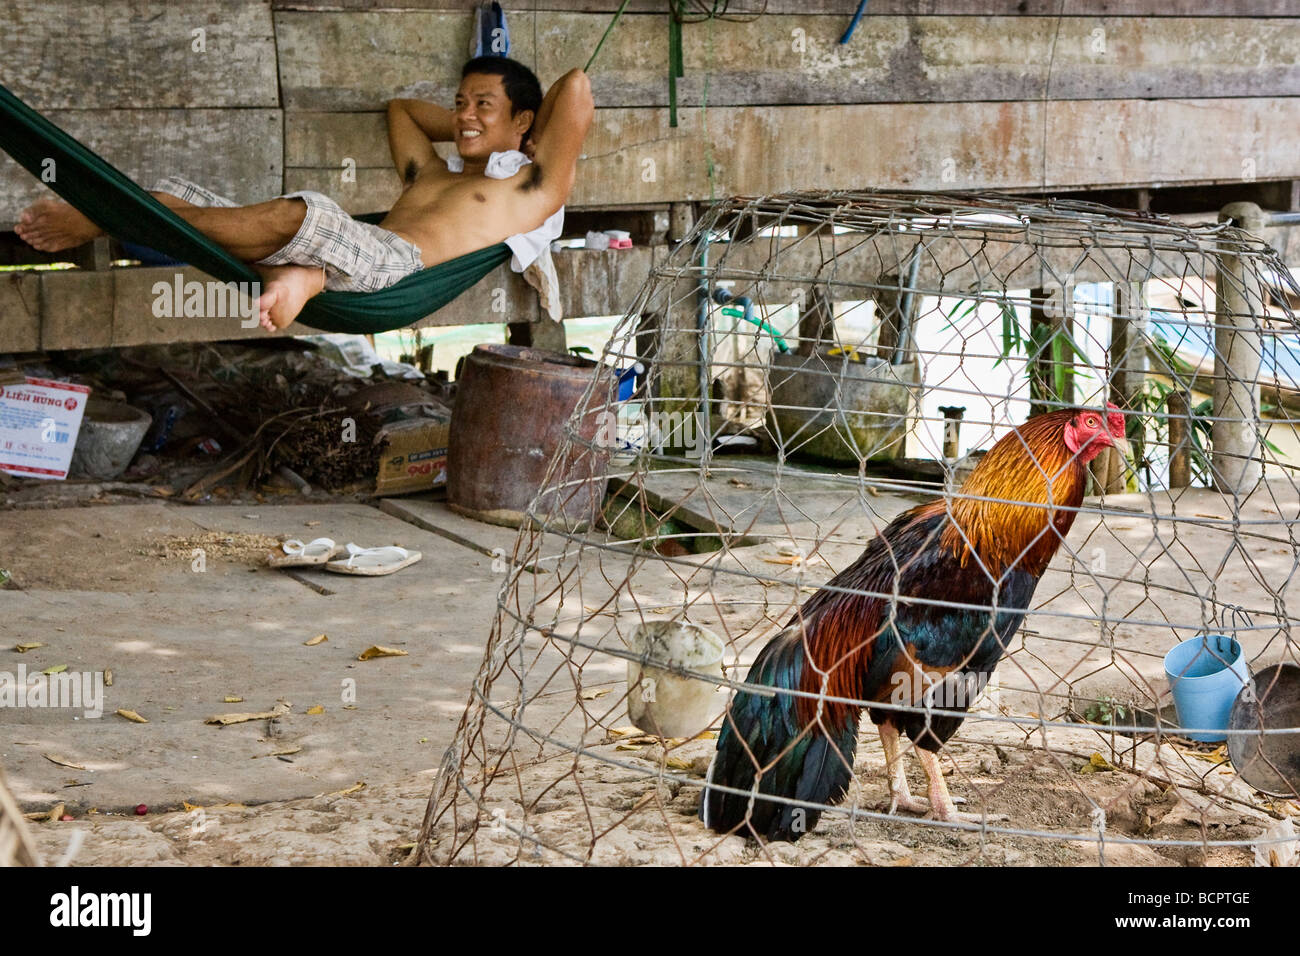 A Vietnamese man in a hammock outside his house next to a cockerel in a wire cage Stock Photo